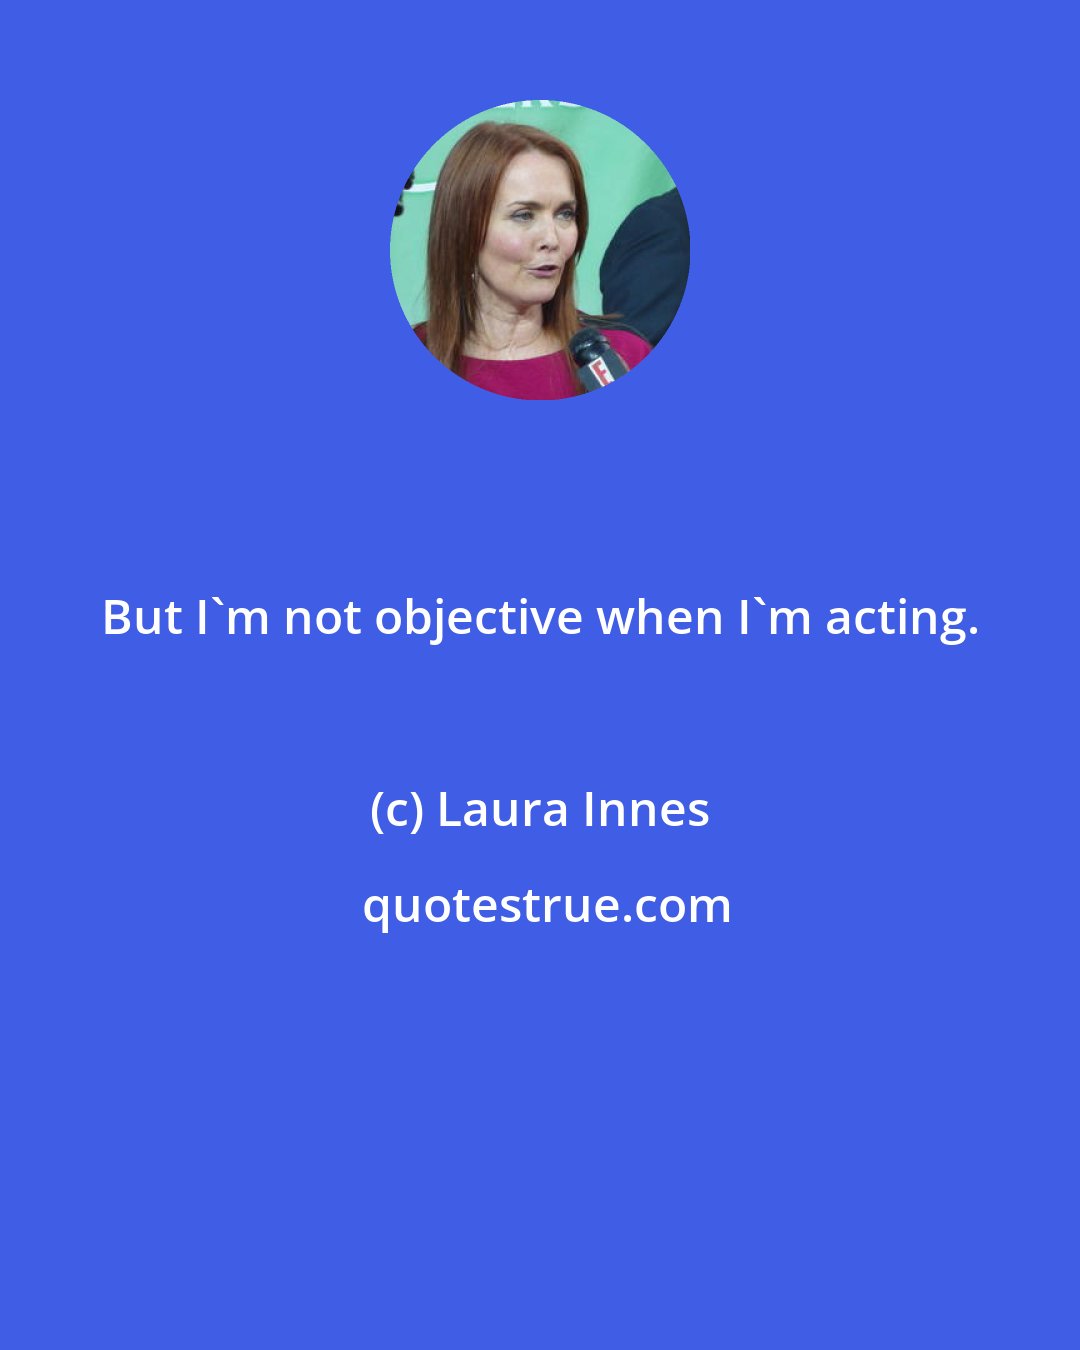 Laura Innes: But I'm not objective when I'm acting.